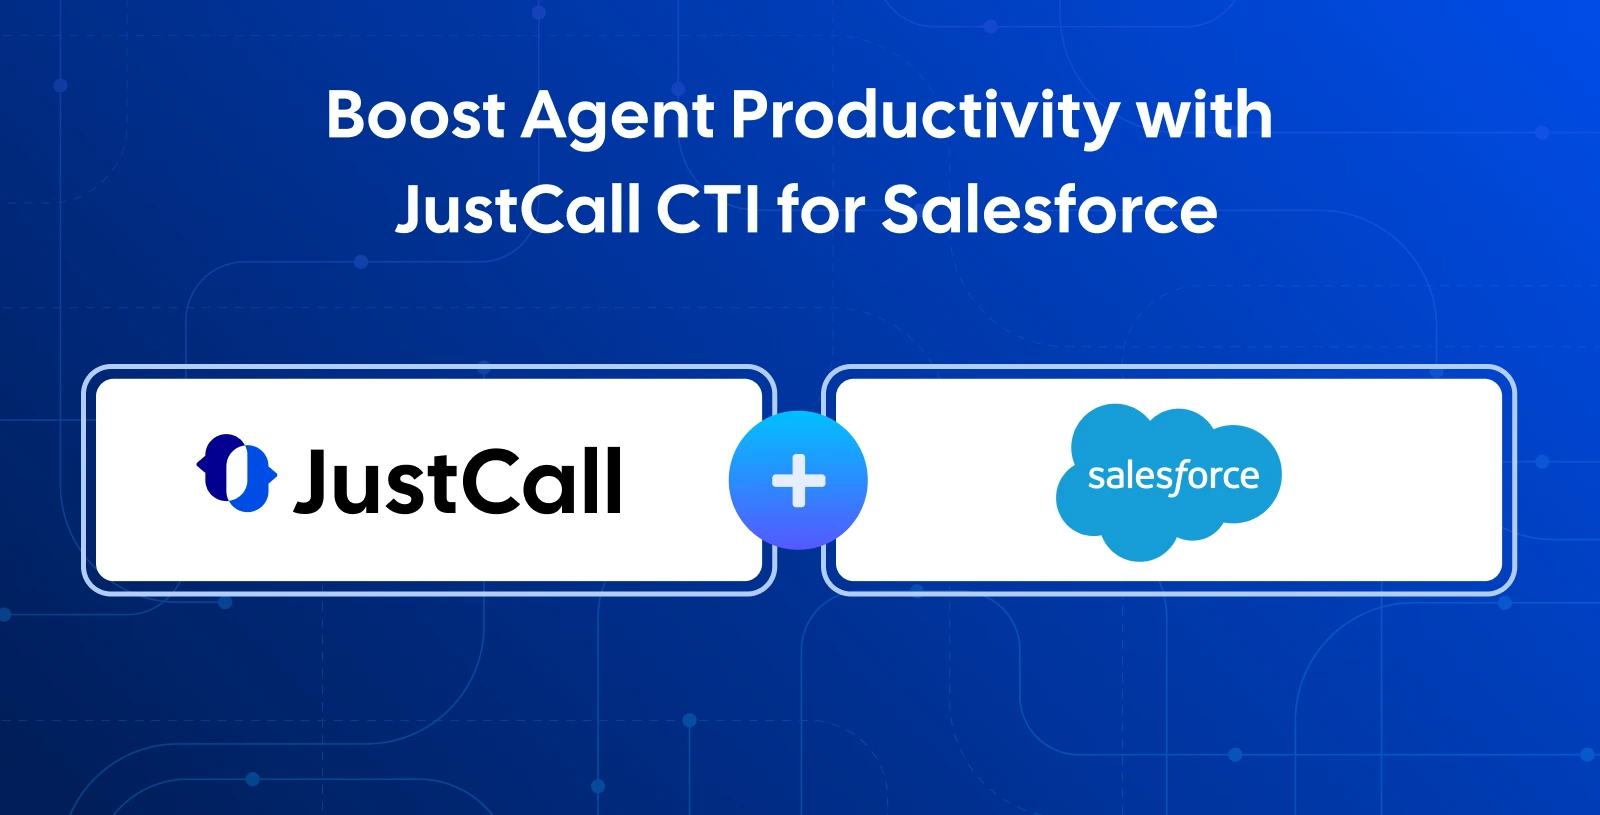 Introducing JustCall CTI: The Agent Productivity Boosting Salesforce Integration on AppExchange!